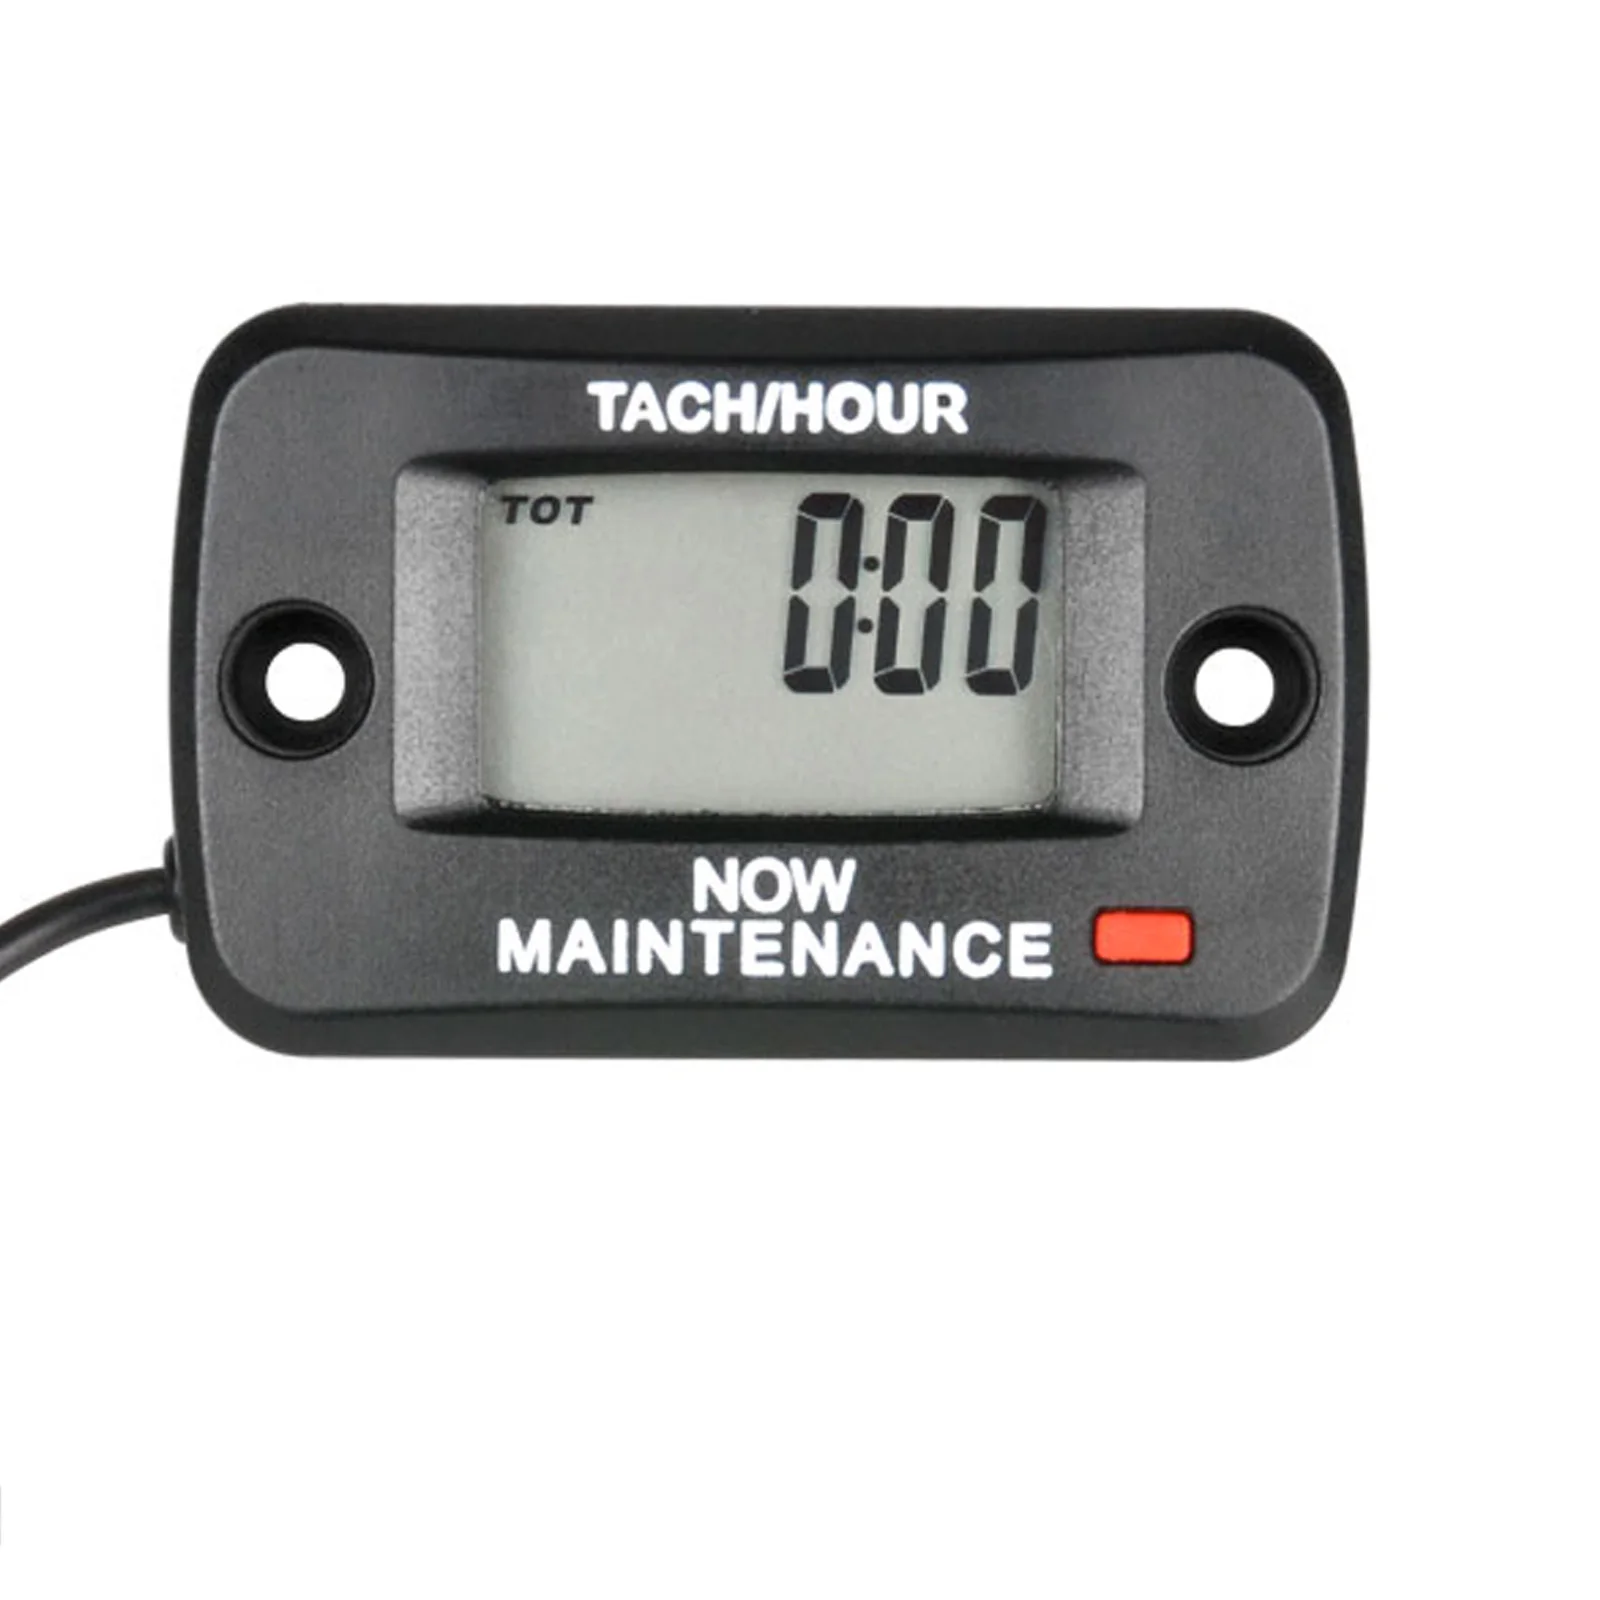 

Digital Hour Meter Self Powered Inductive Tachometer 5 groups Maintenance Reminder Conversion machine oil for Generator Lawn Mow